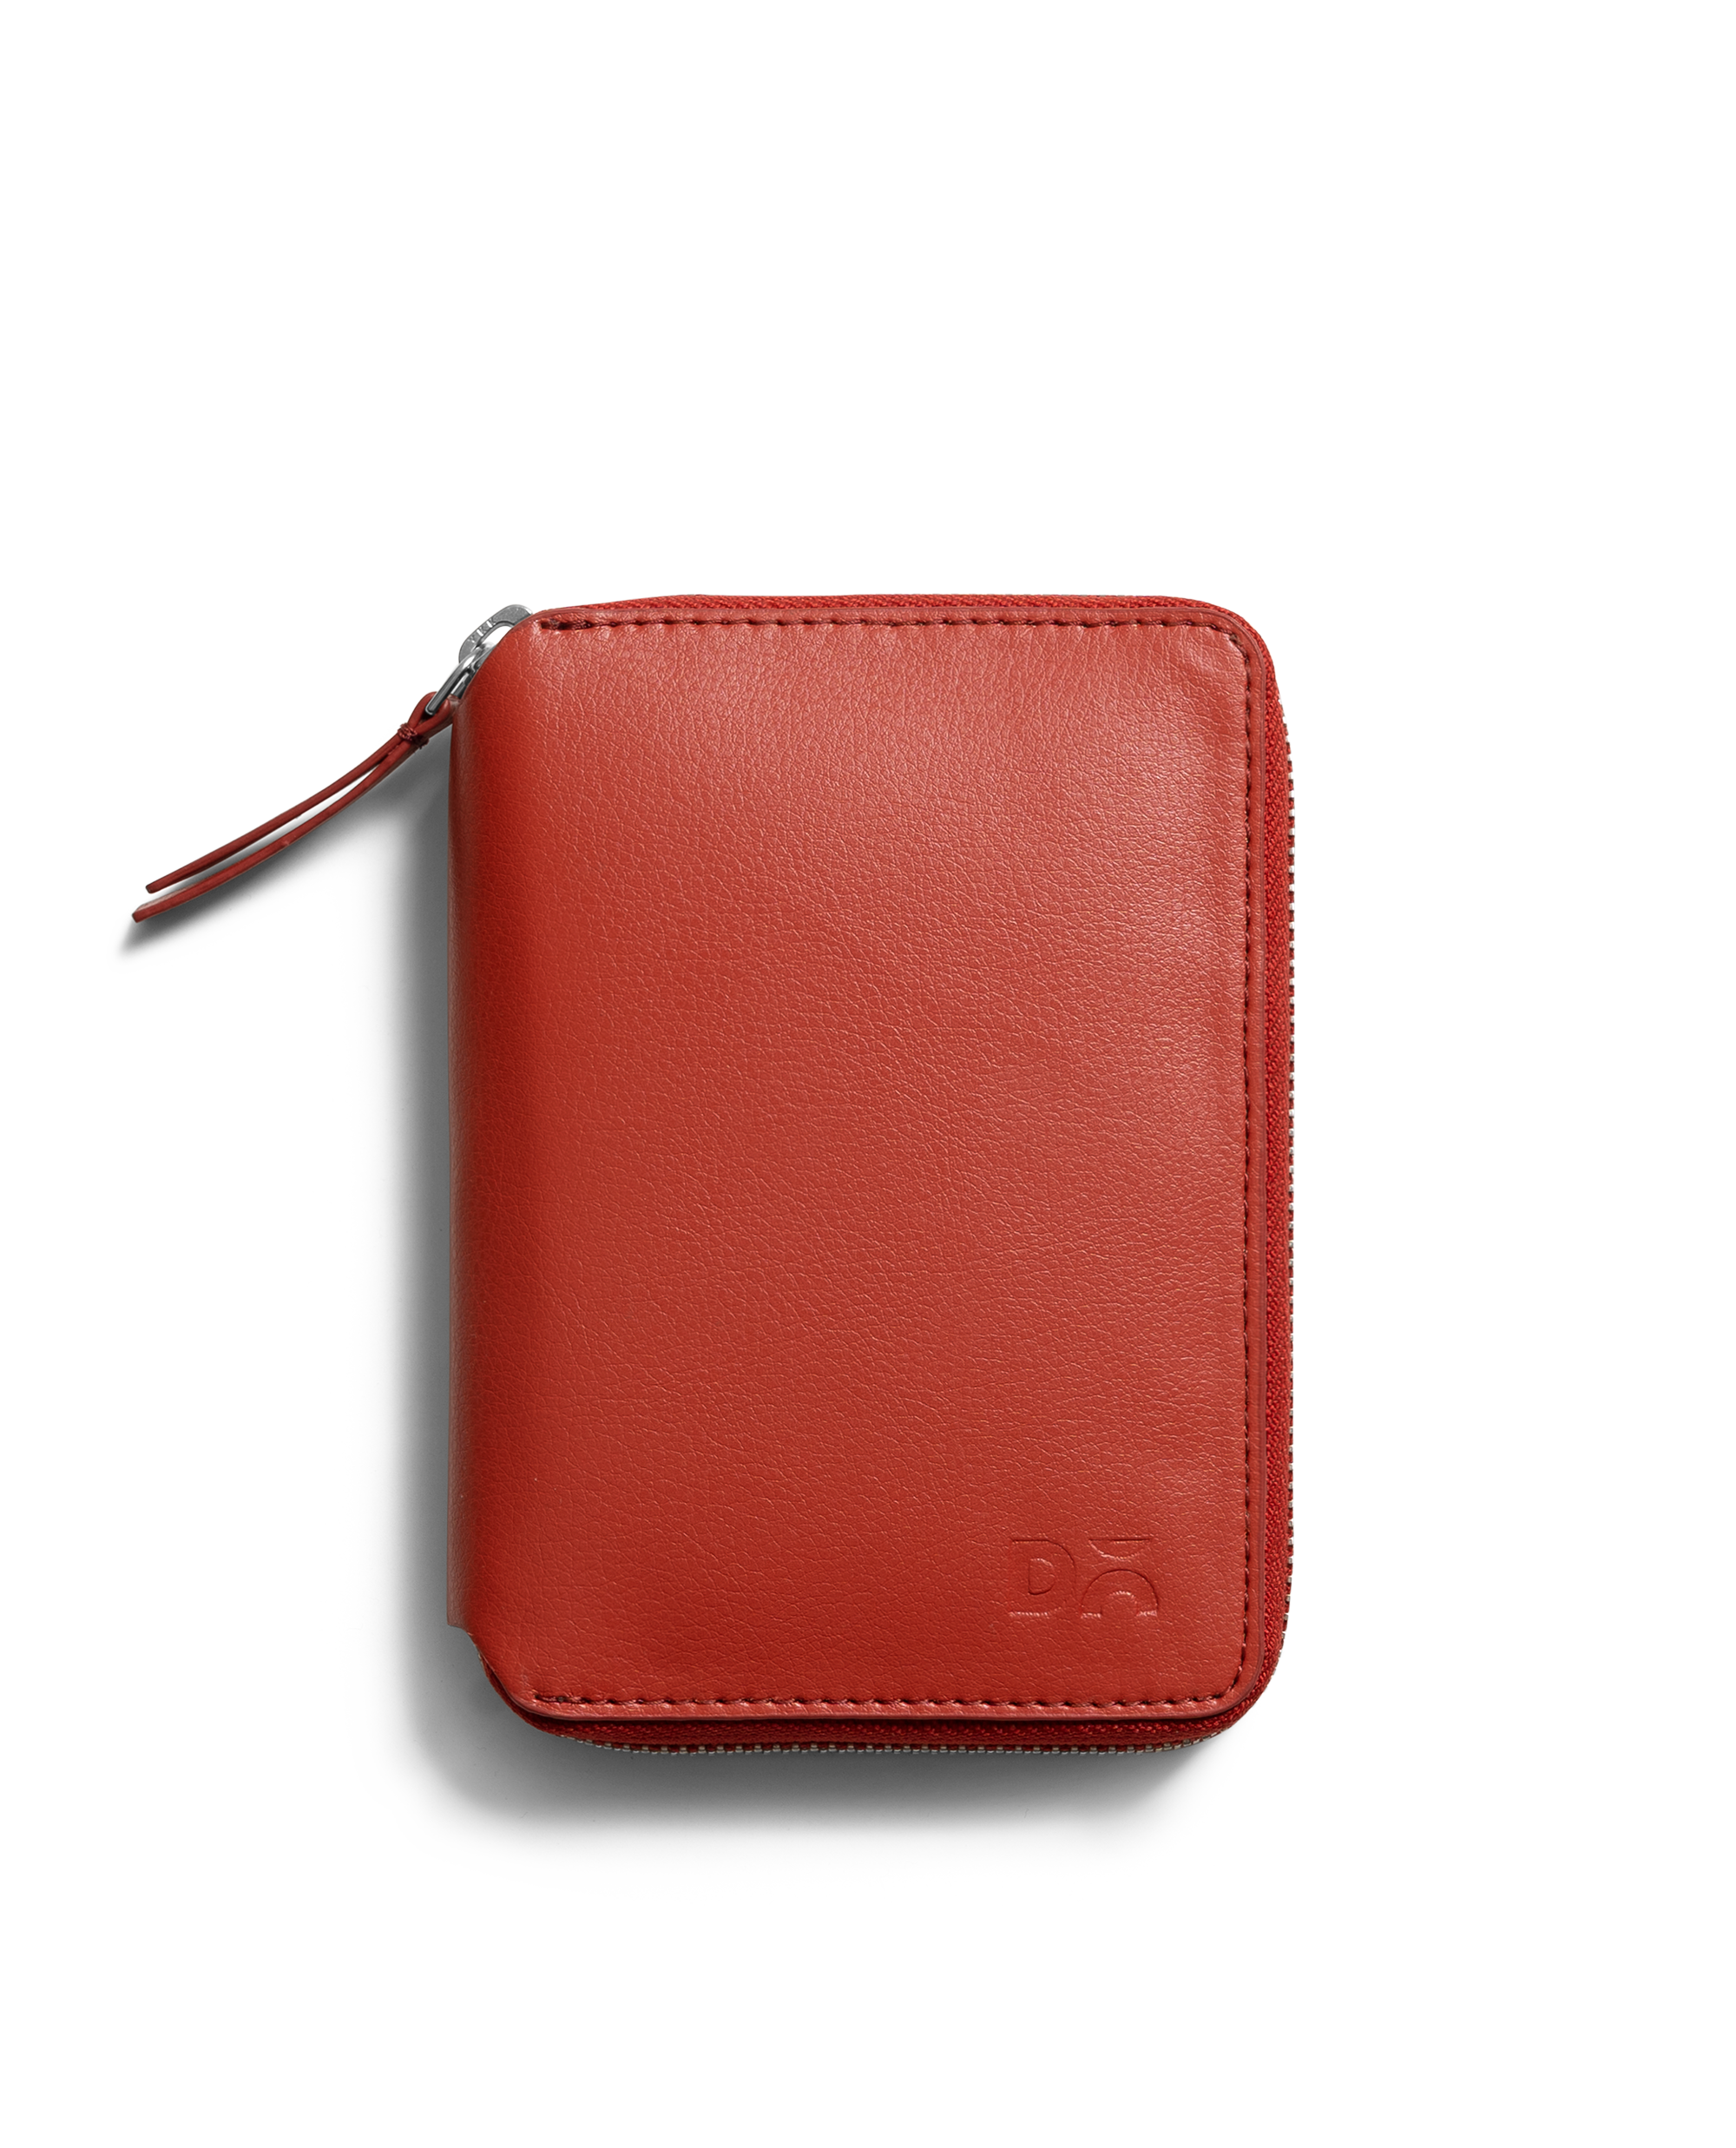 Adventure Worx Go-X Visa Travel Neck Pouch/Passport Holder | Go-X Visa  Travel Pouch | Stylish Passport Pouch | Premium Passport Holder for  International Travel | Available in Red : Amazon.in: Fashion